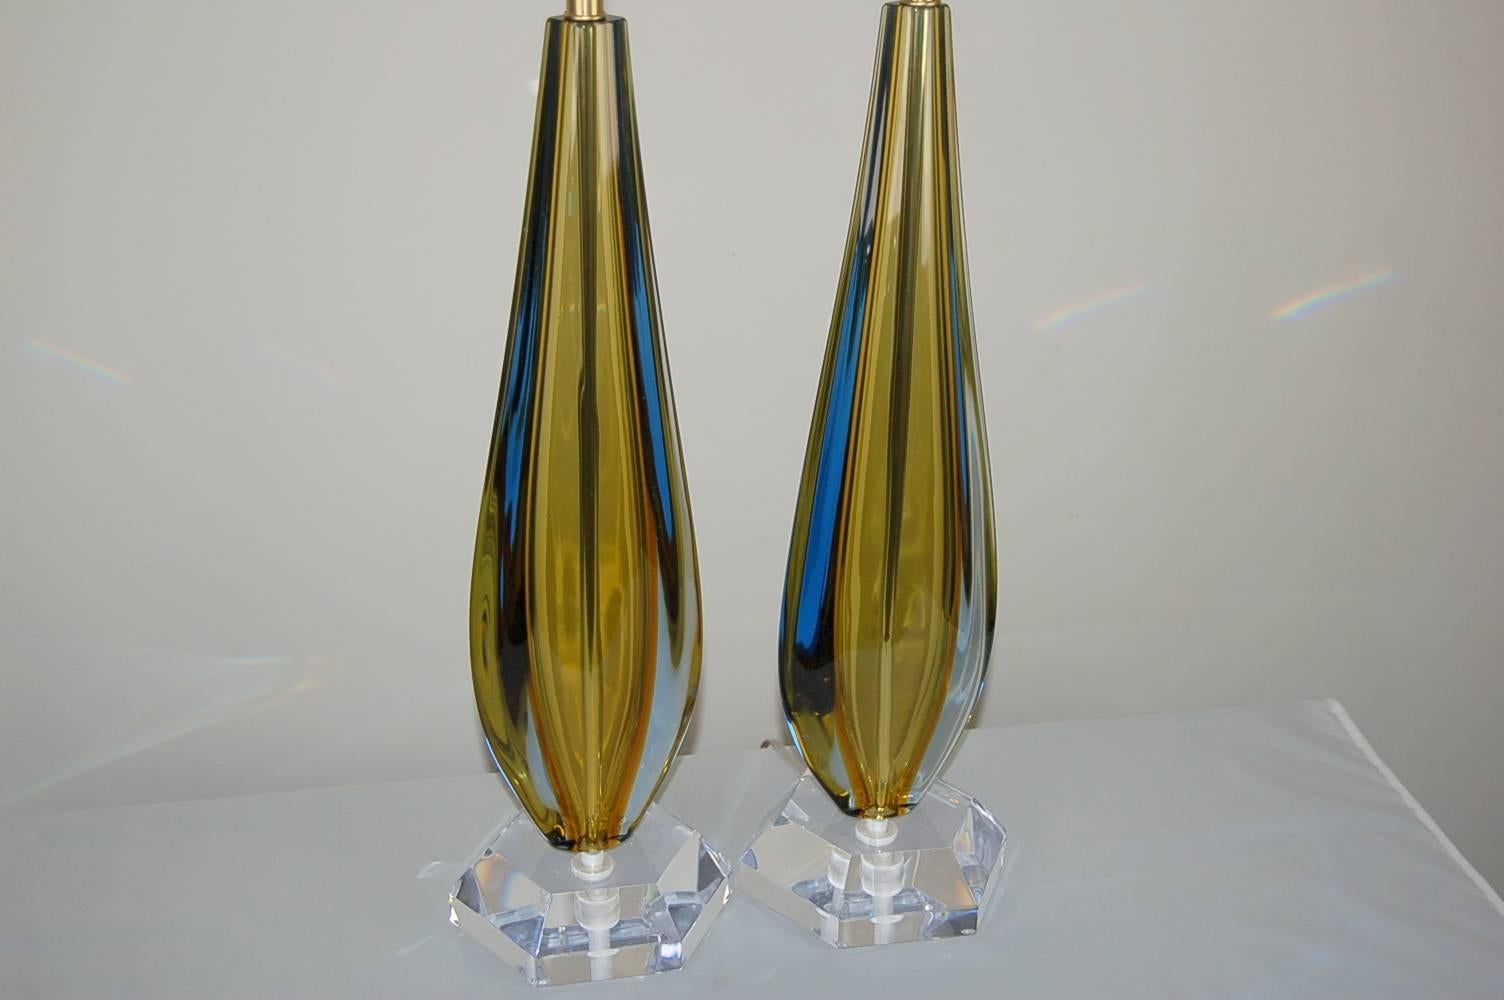 Matched pair of vintage sommerso almond shaped Murano table lamps. A towering chunk of GOLD glass, enveloped by a thick layer of NAVY BLUE glass. Such depth and color changing magic, thanks to the Sommerso process. 

The lamps are 27 inches from